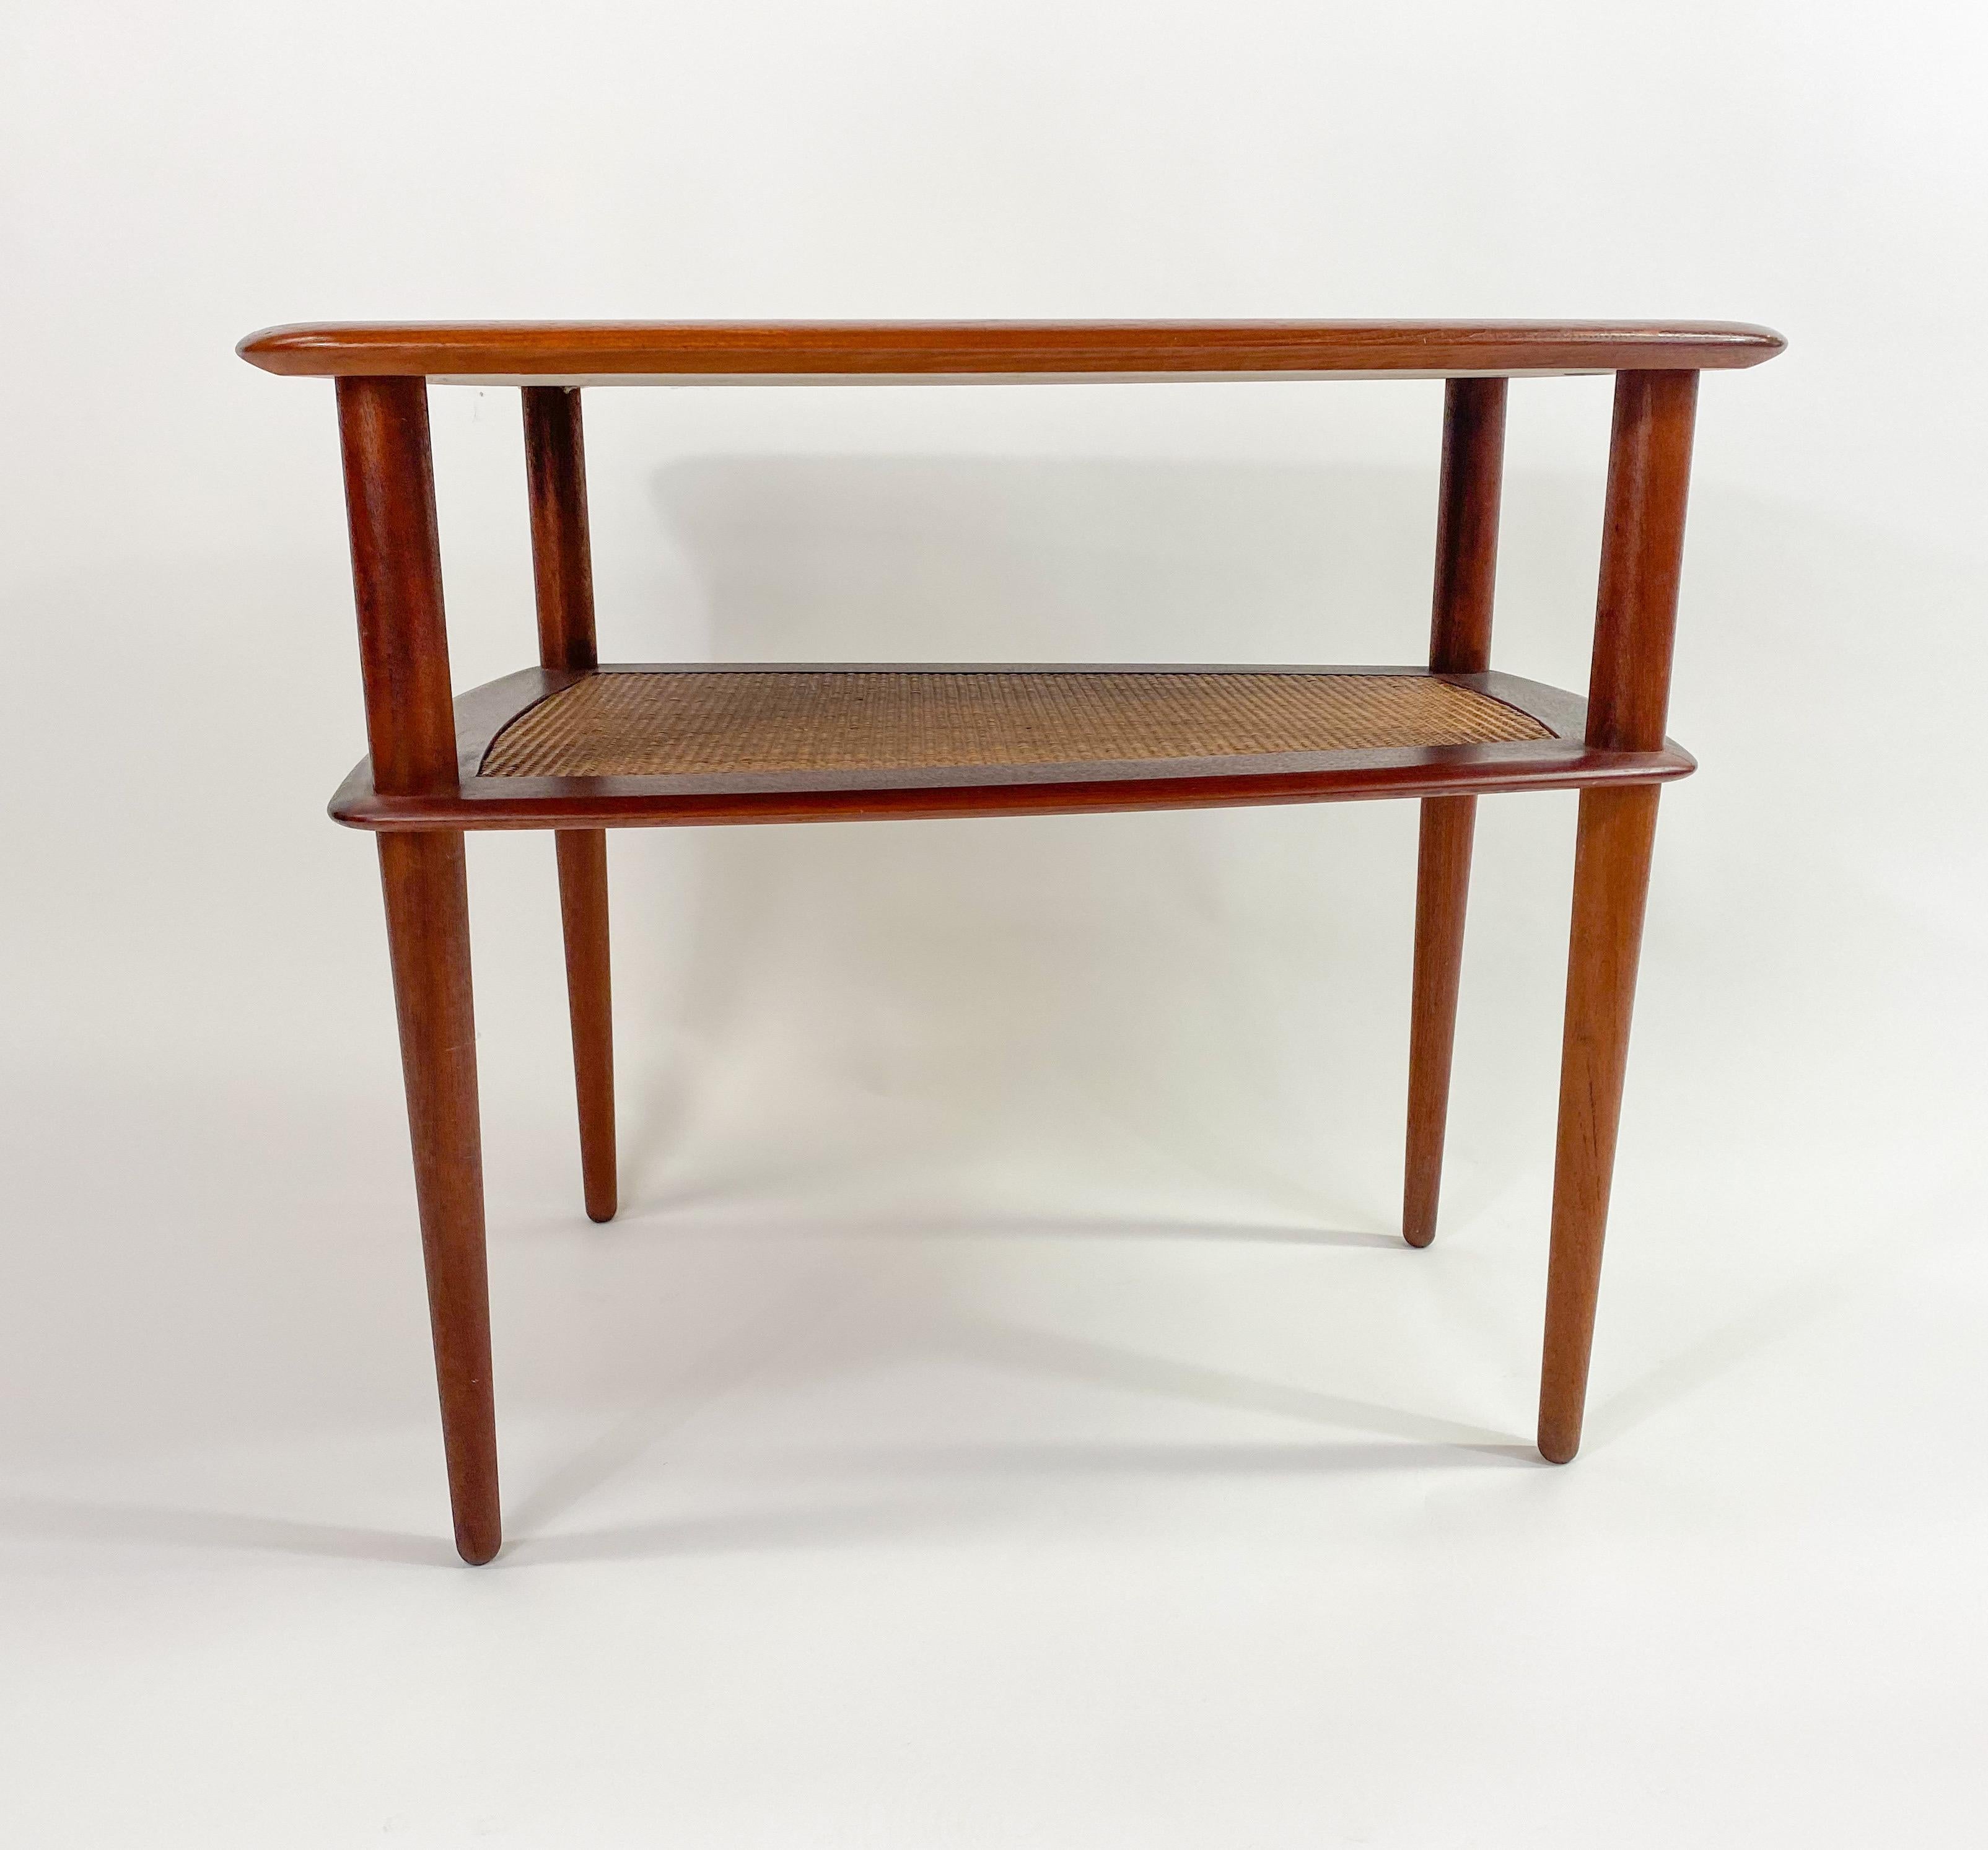 An elegant pair of Mid- Century Modern two tier solid teak side or end tables designed by Hvidt and Molgraad for John Stuart. The tables are marked made in Denmark and have John Stuart stay in the bottom. The high quality tables feature a caned